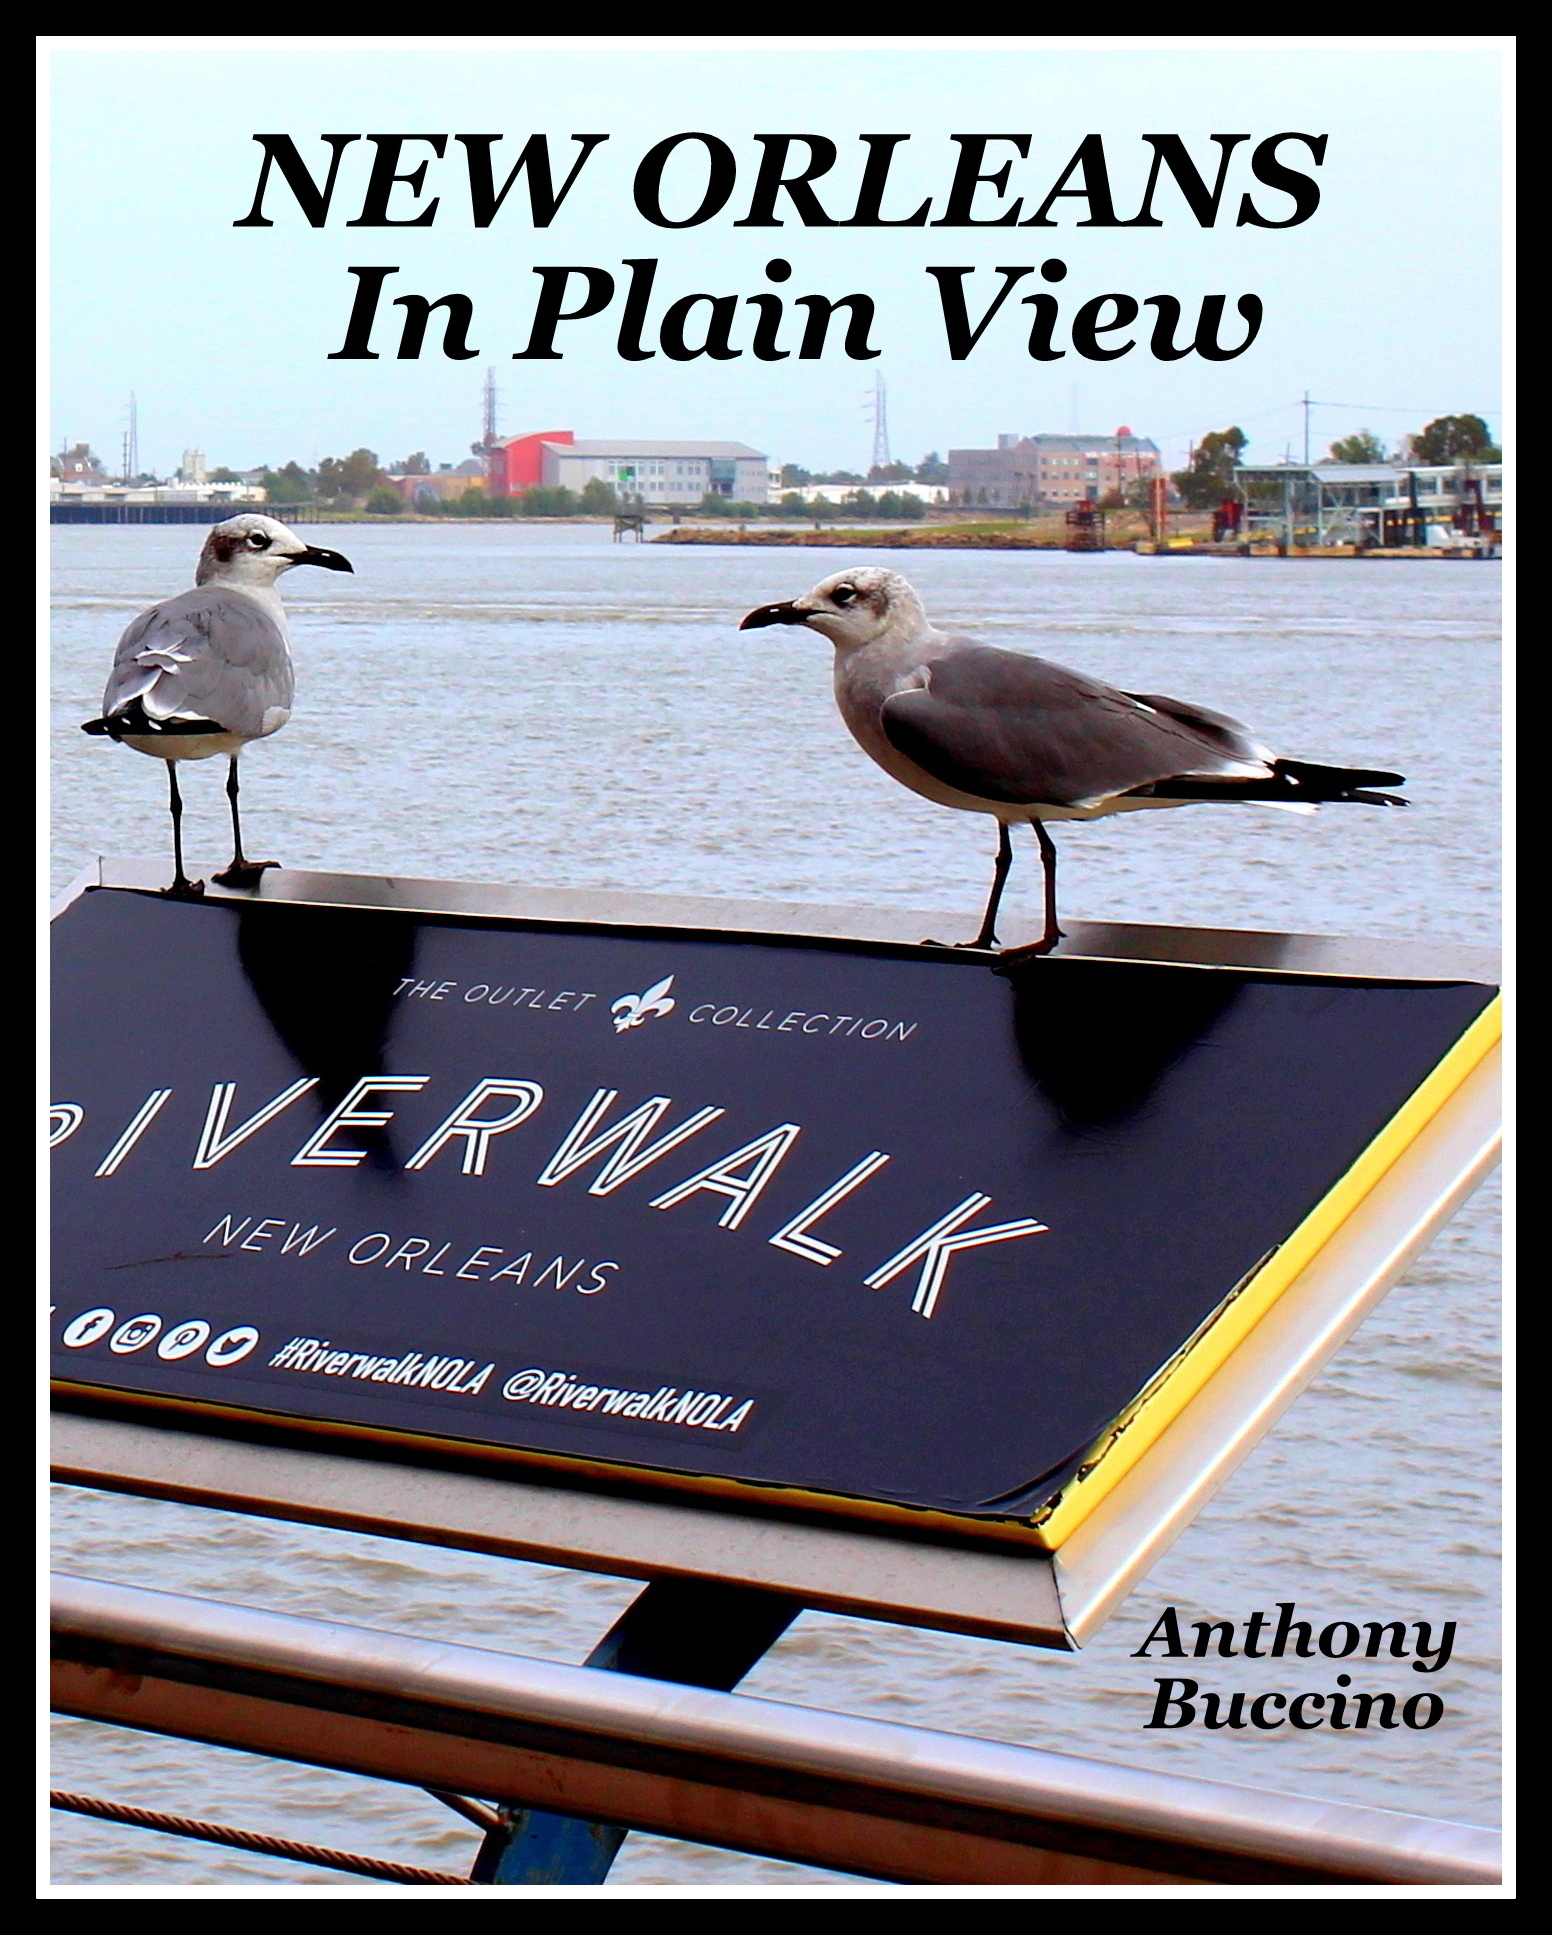 New Orleans In Plain View – by Anthony Buccino, photography